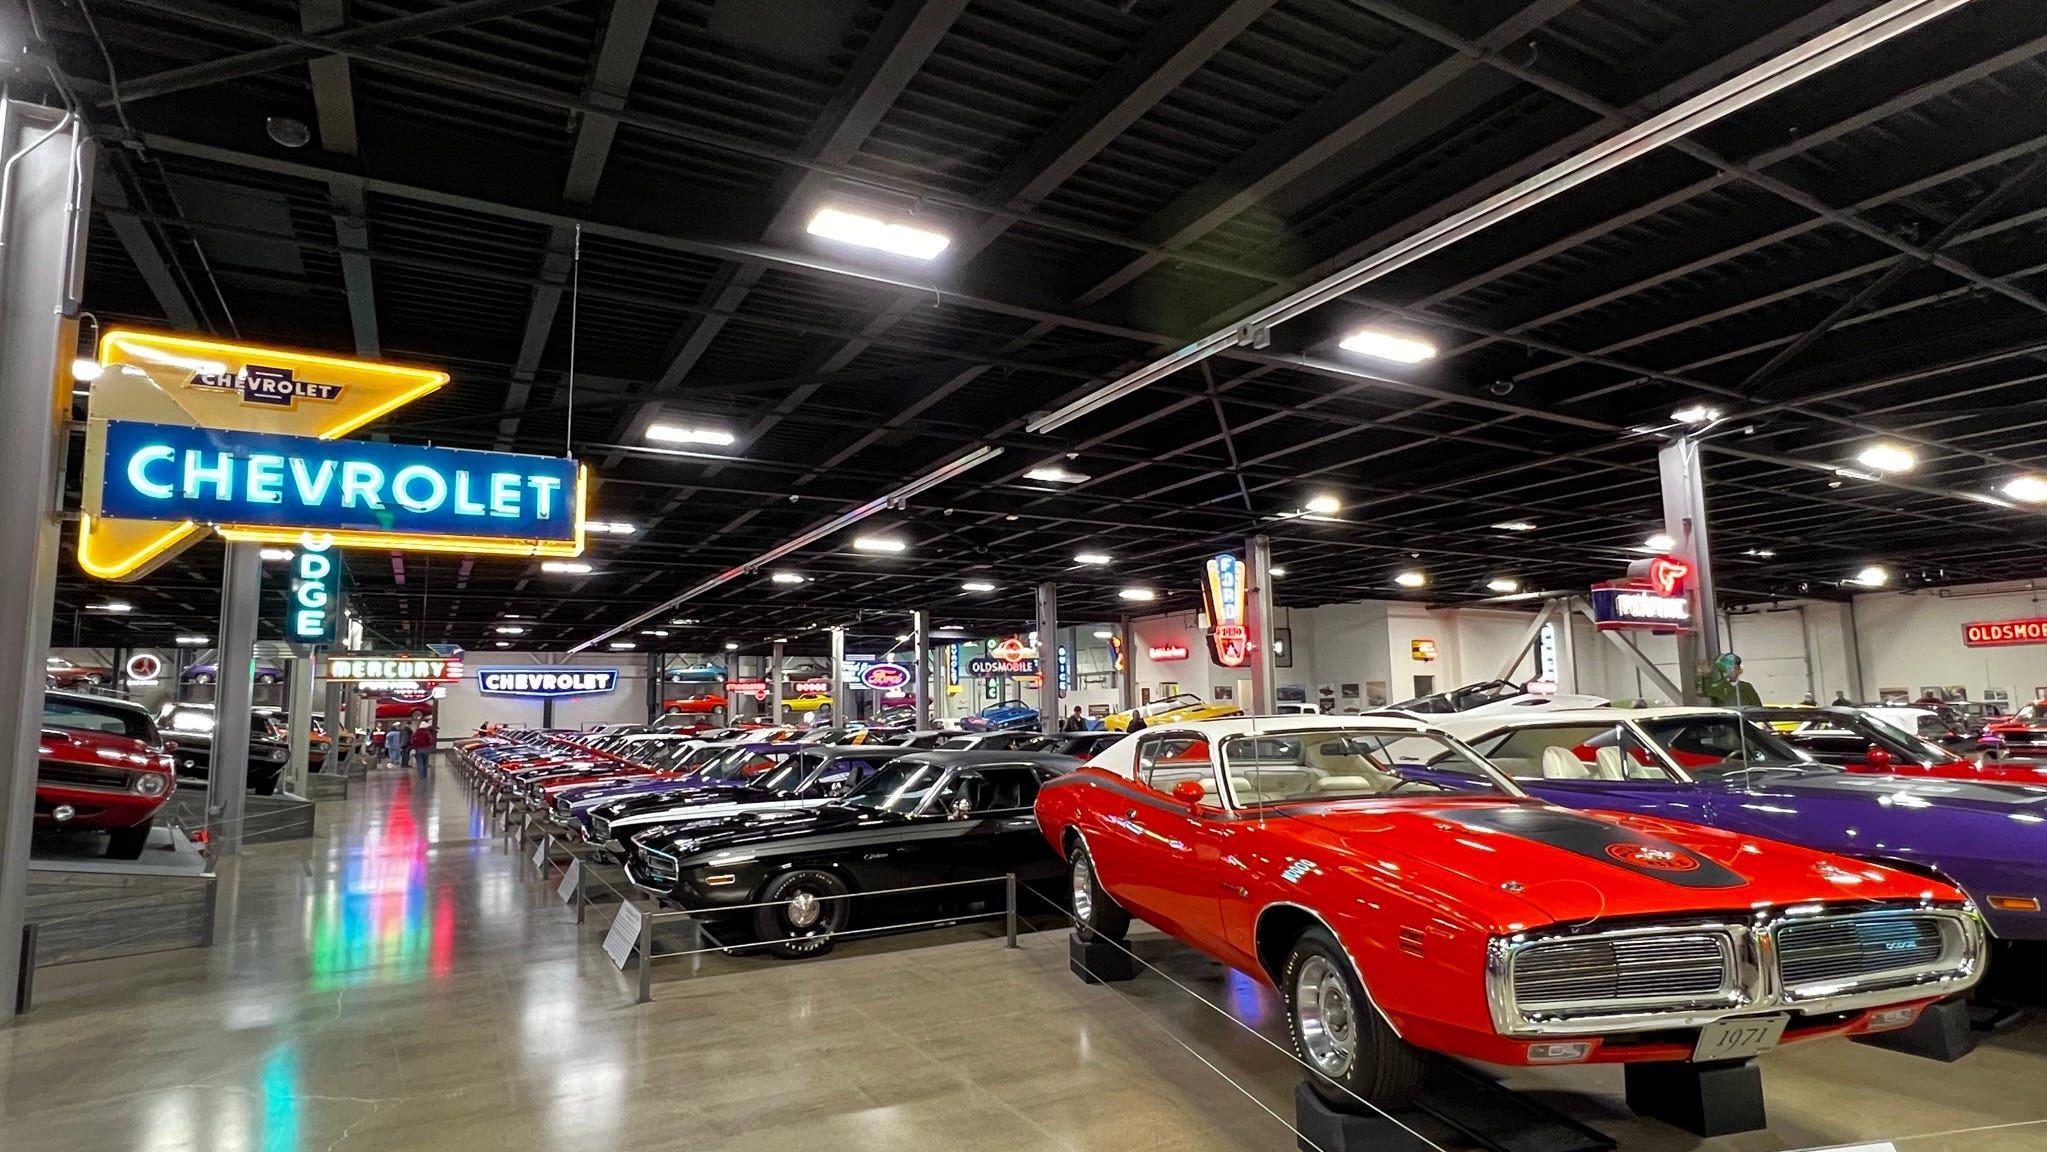 LeMay Car Museum perfect place to spend a rainy afternoon! Don't miss the slot cars in the